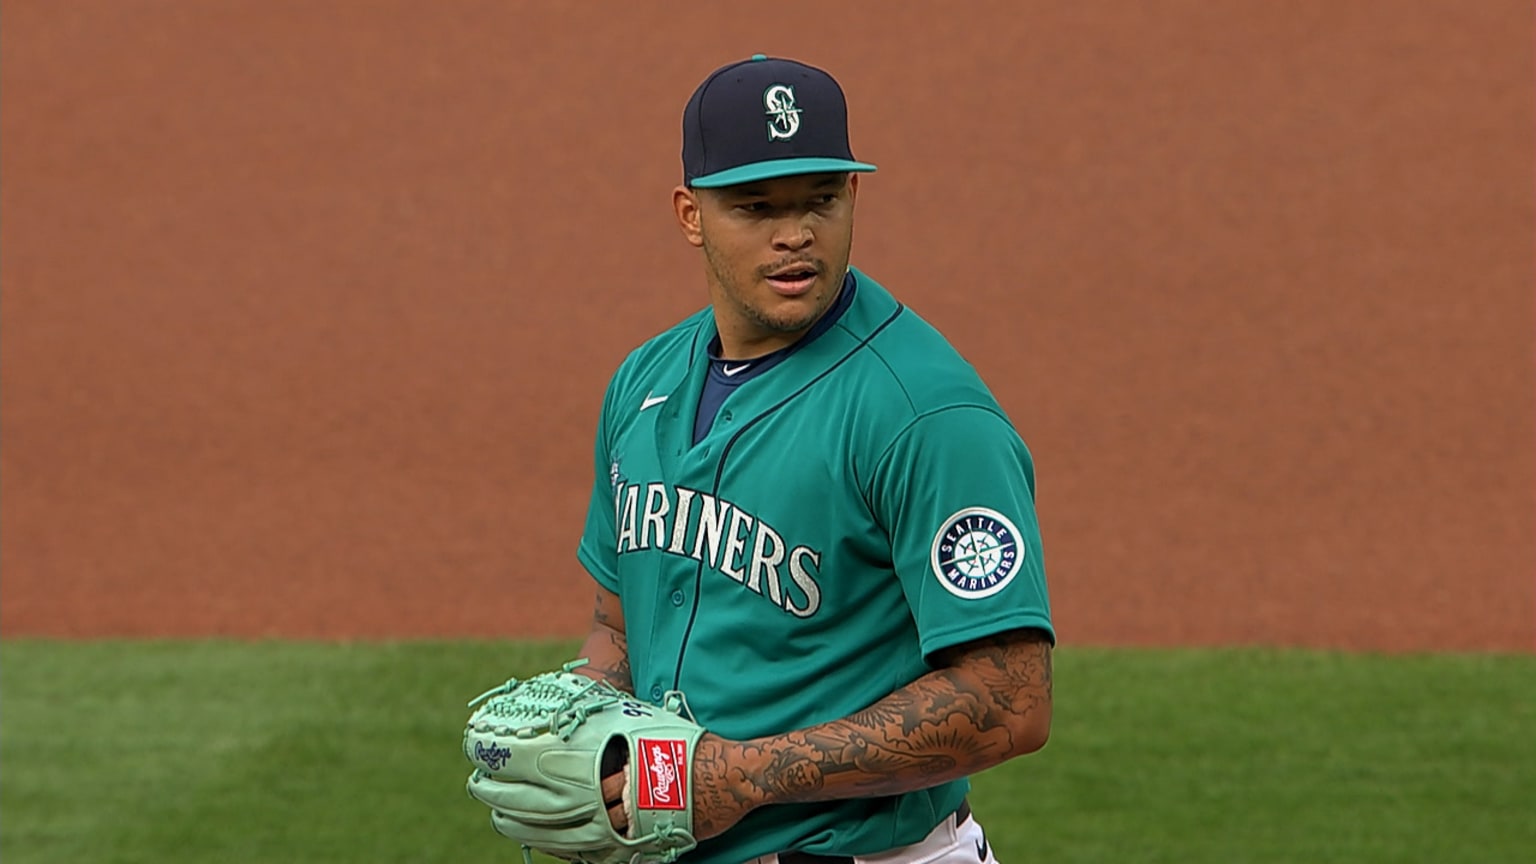 He's only 27, but Taijuan Walker returns to the Mariners older, wiser and  ready to be a leader